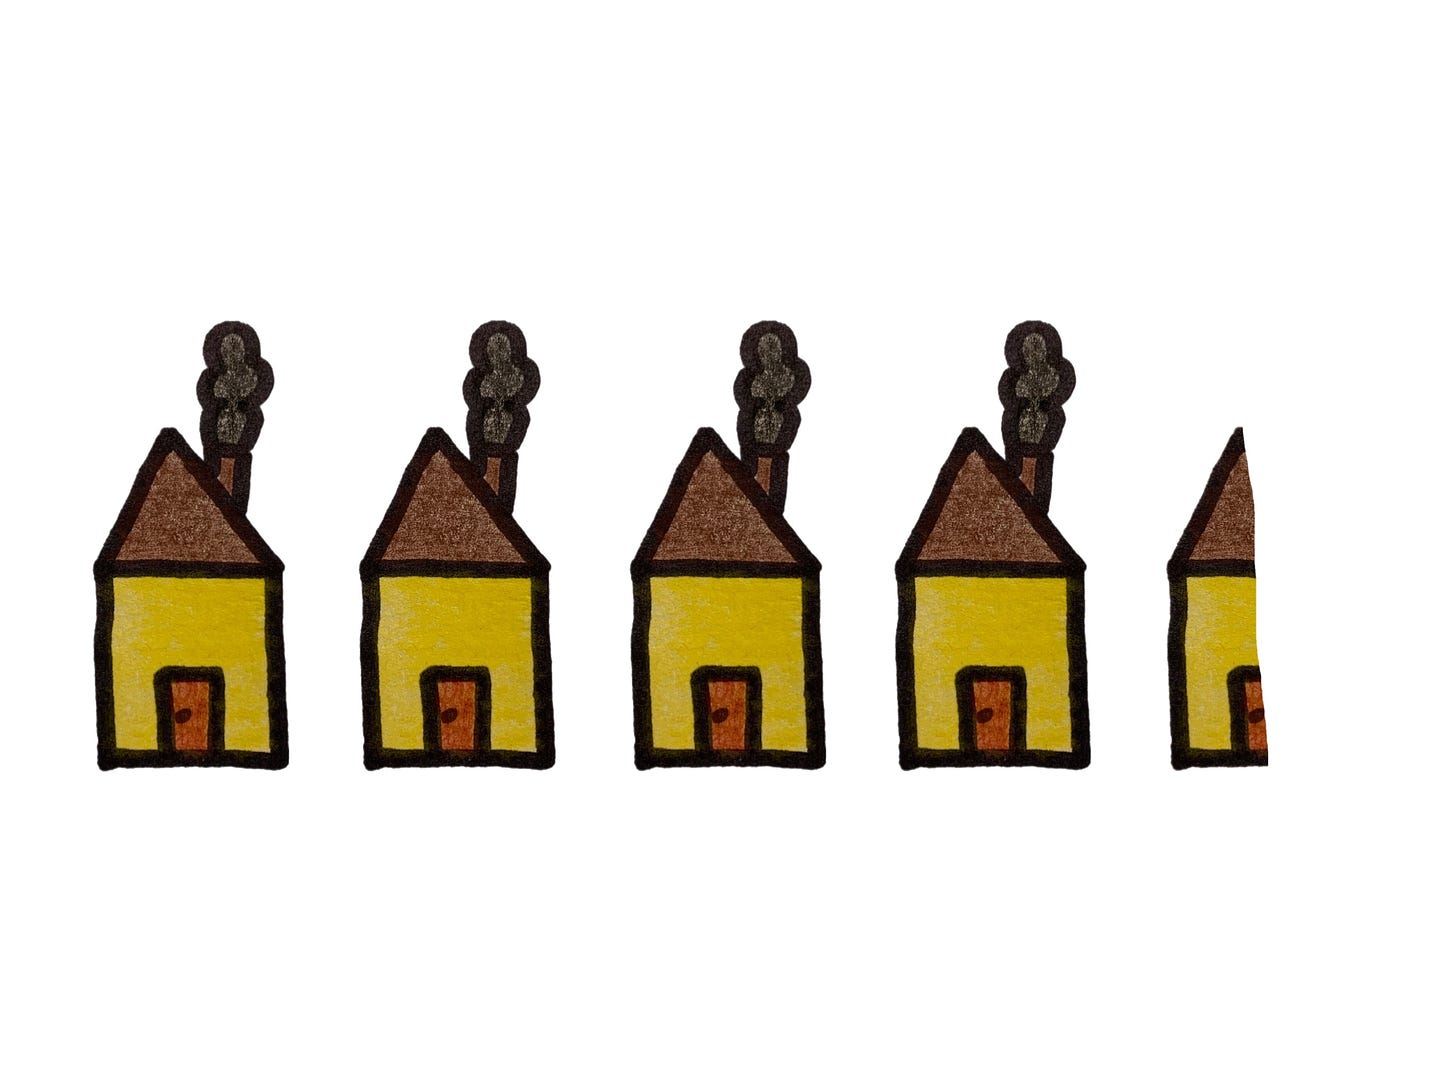 four houses and one half house, depicting the 4.5 household ranking scale